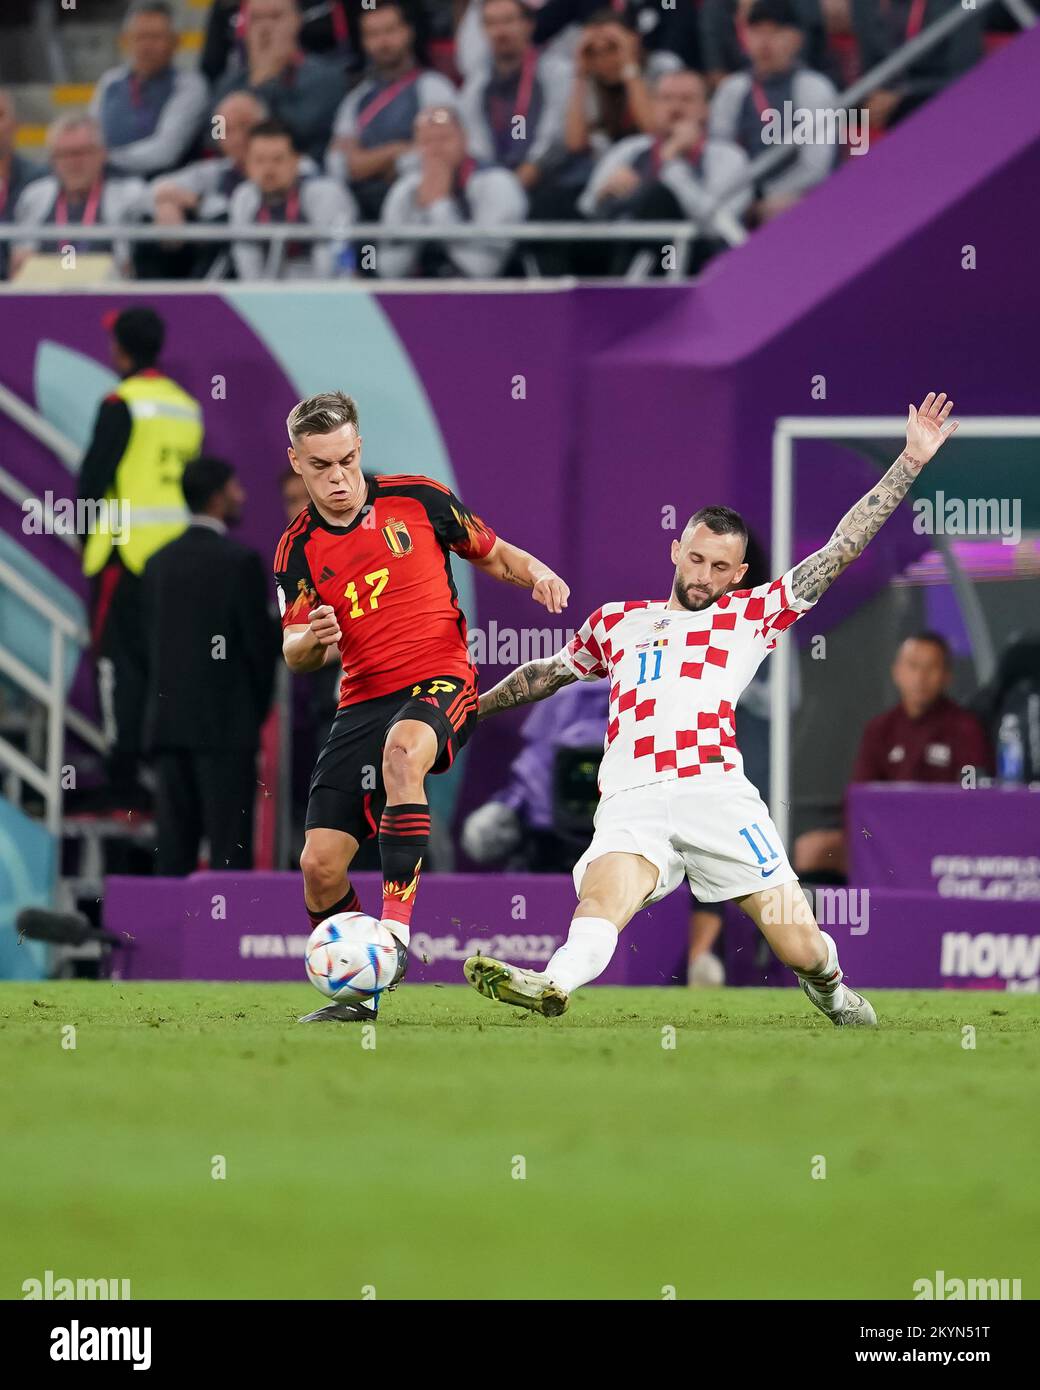 December 1, 2022, Doha, Doha, Qatar, Qatar: DOHA, QATAR - DECEMBER 1: Player of Croatia Marcelo BrozoviÄ‡ fights for the ball with player of Belgium Leandro Trossard during the FIFA World Cup Qatar 2022 group F match between Croatia and Belgium at Ahmad Bin Ali Stadium on December 1, 2022 in Doha, Qatar. (Credit Image: © Florencia Tan Jun/PX Imagens via ZUMA Press Wire) Stock Photo